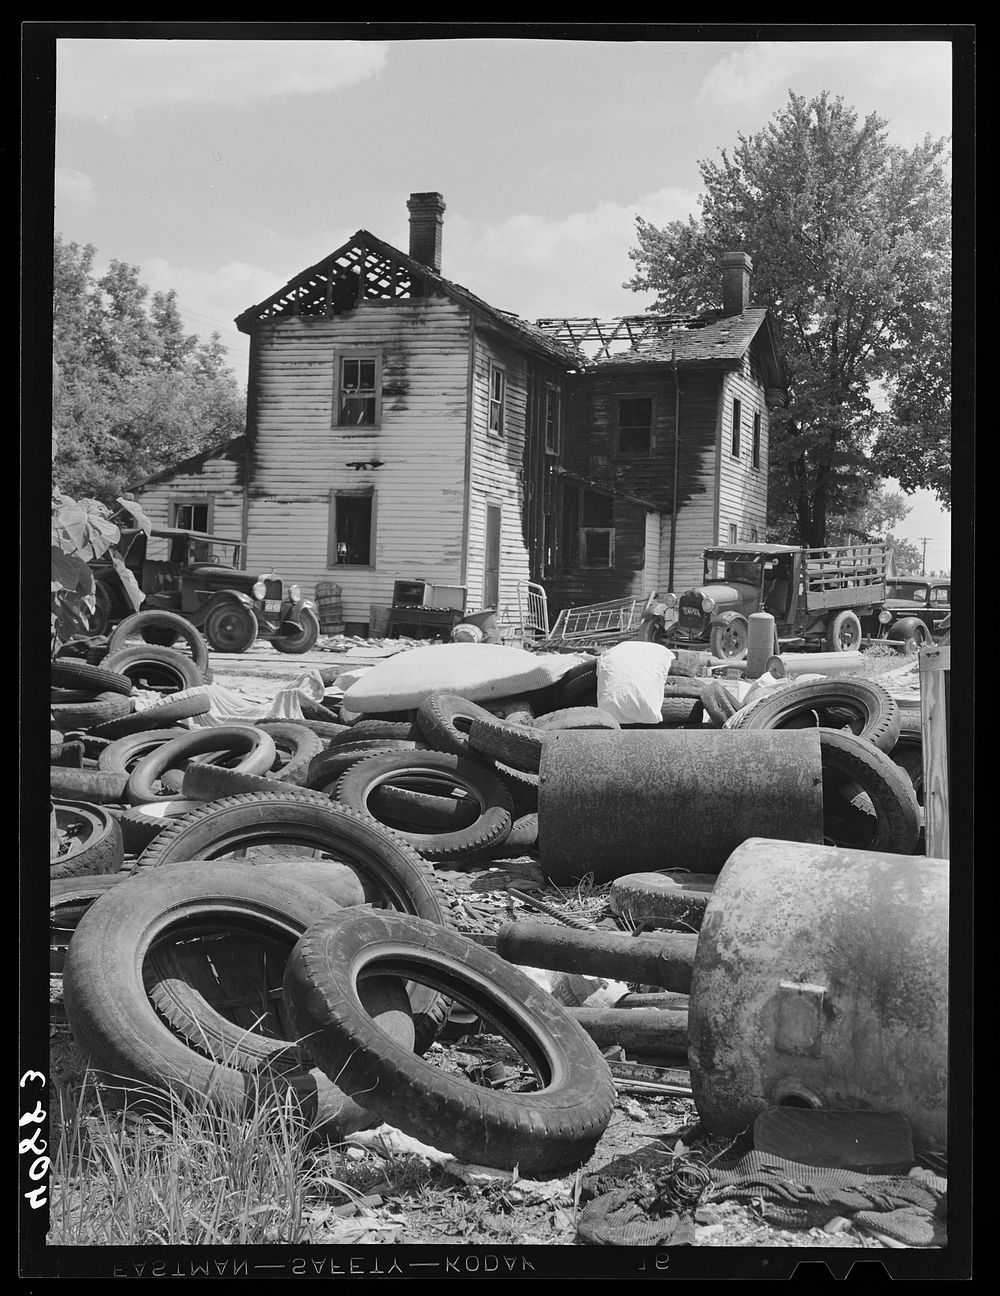 Auto junkyard in Salisbury, Maryland. Sourced from the Library of Congress.